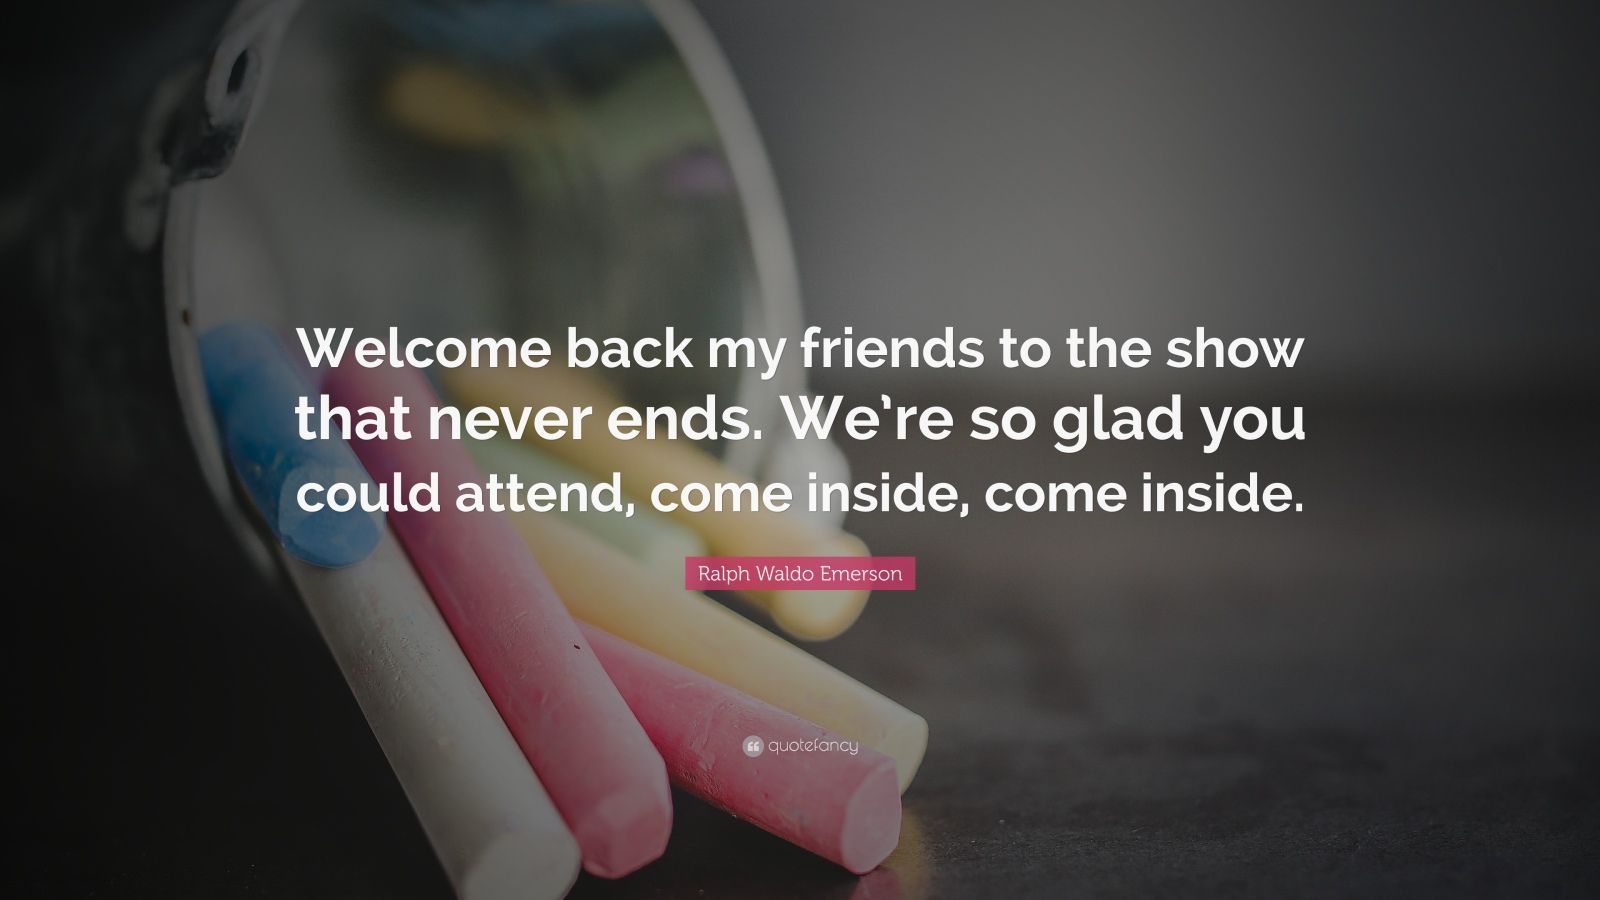 487996-Ralph-Waldo-Emerson-Quote-Welcome-back-my-friends-to-the-show-that.jpg